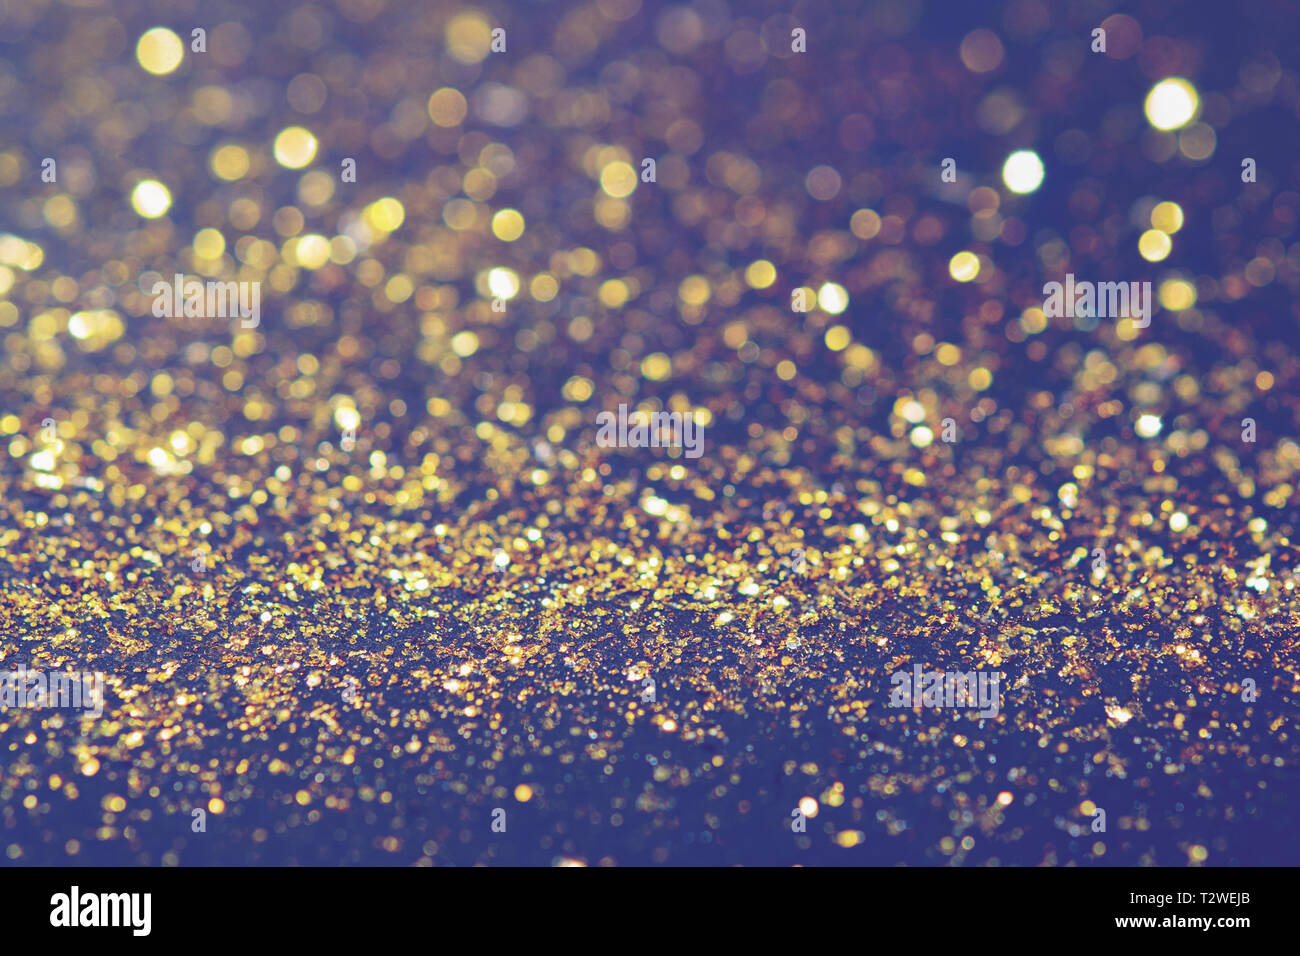 Gorgeous Navy Blue Glitter Texture Background, Blue Glitter, Glitter  Background, Shiny Background Background Image And Wallpaper for Free  Download